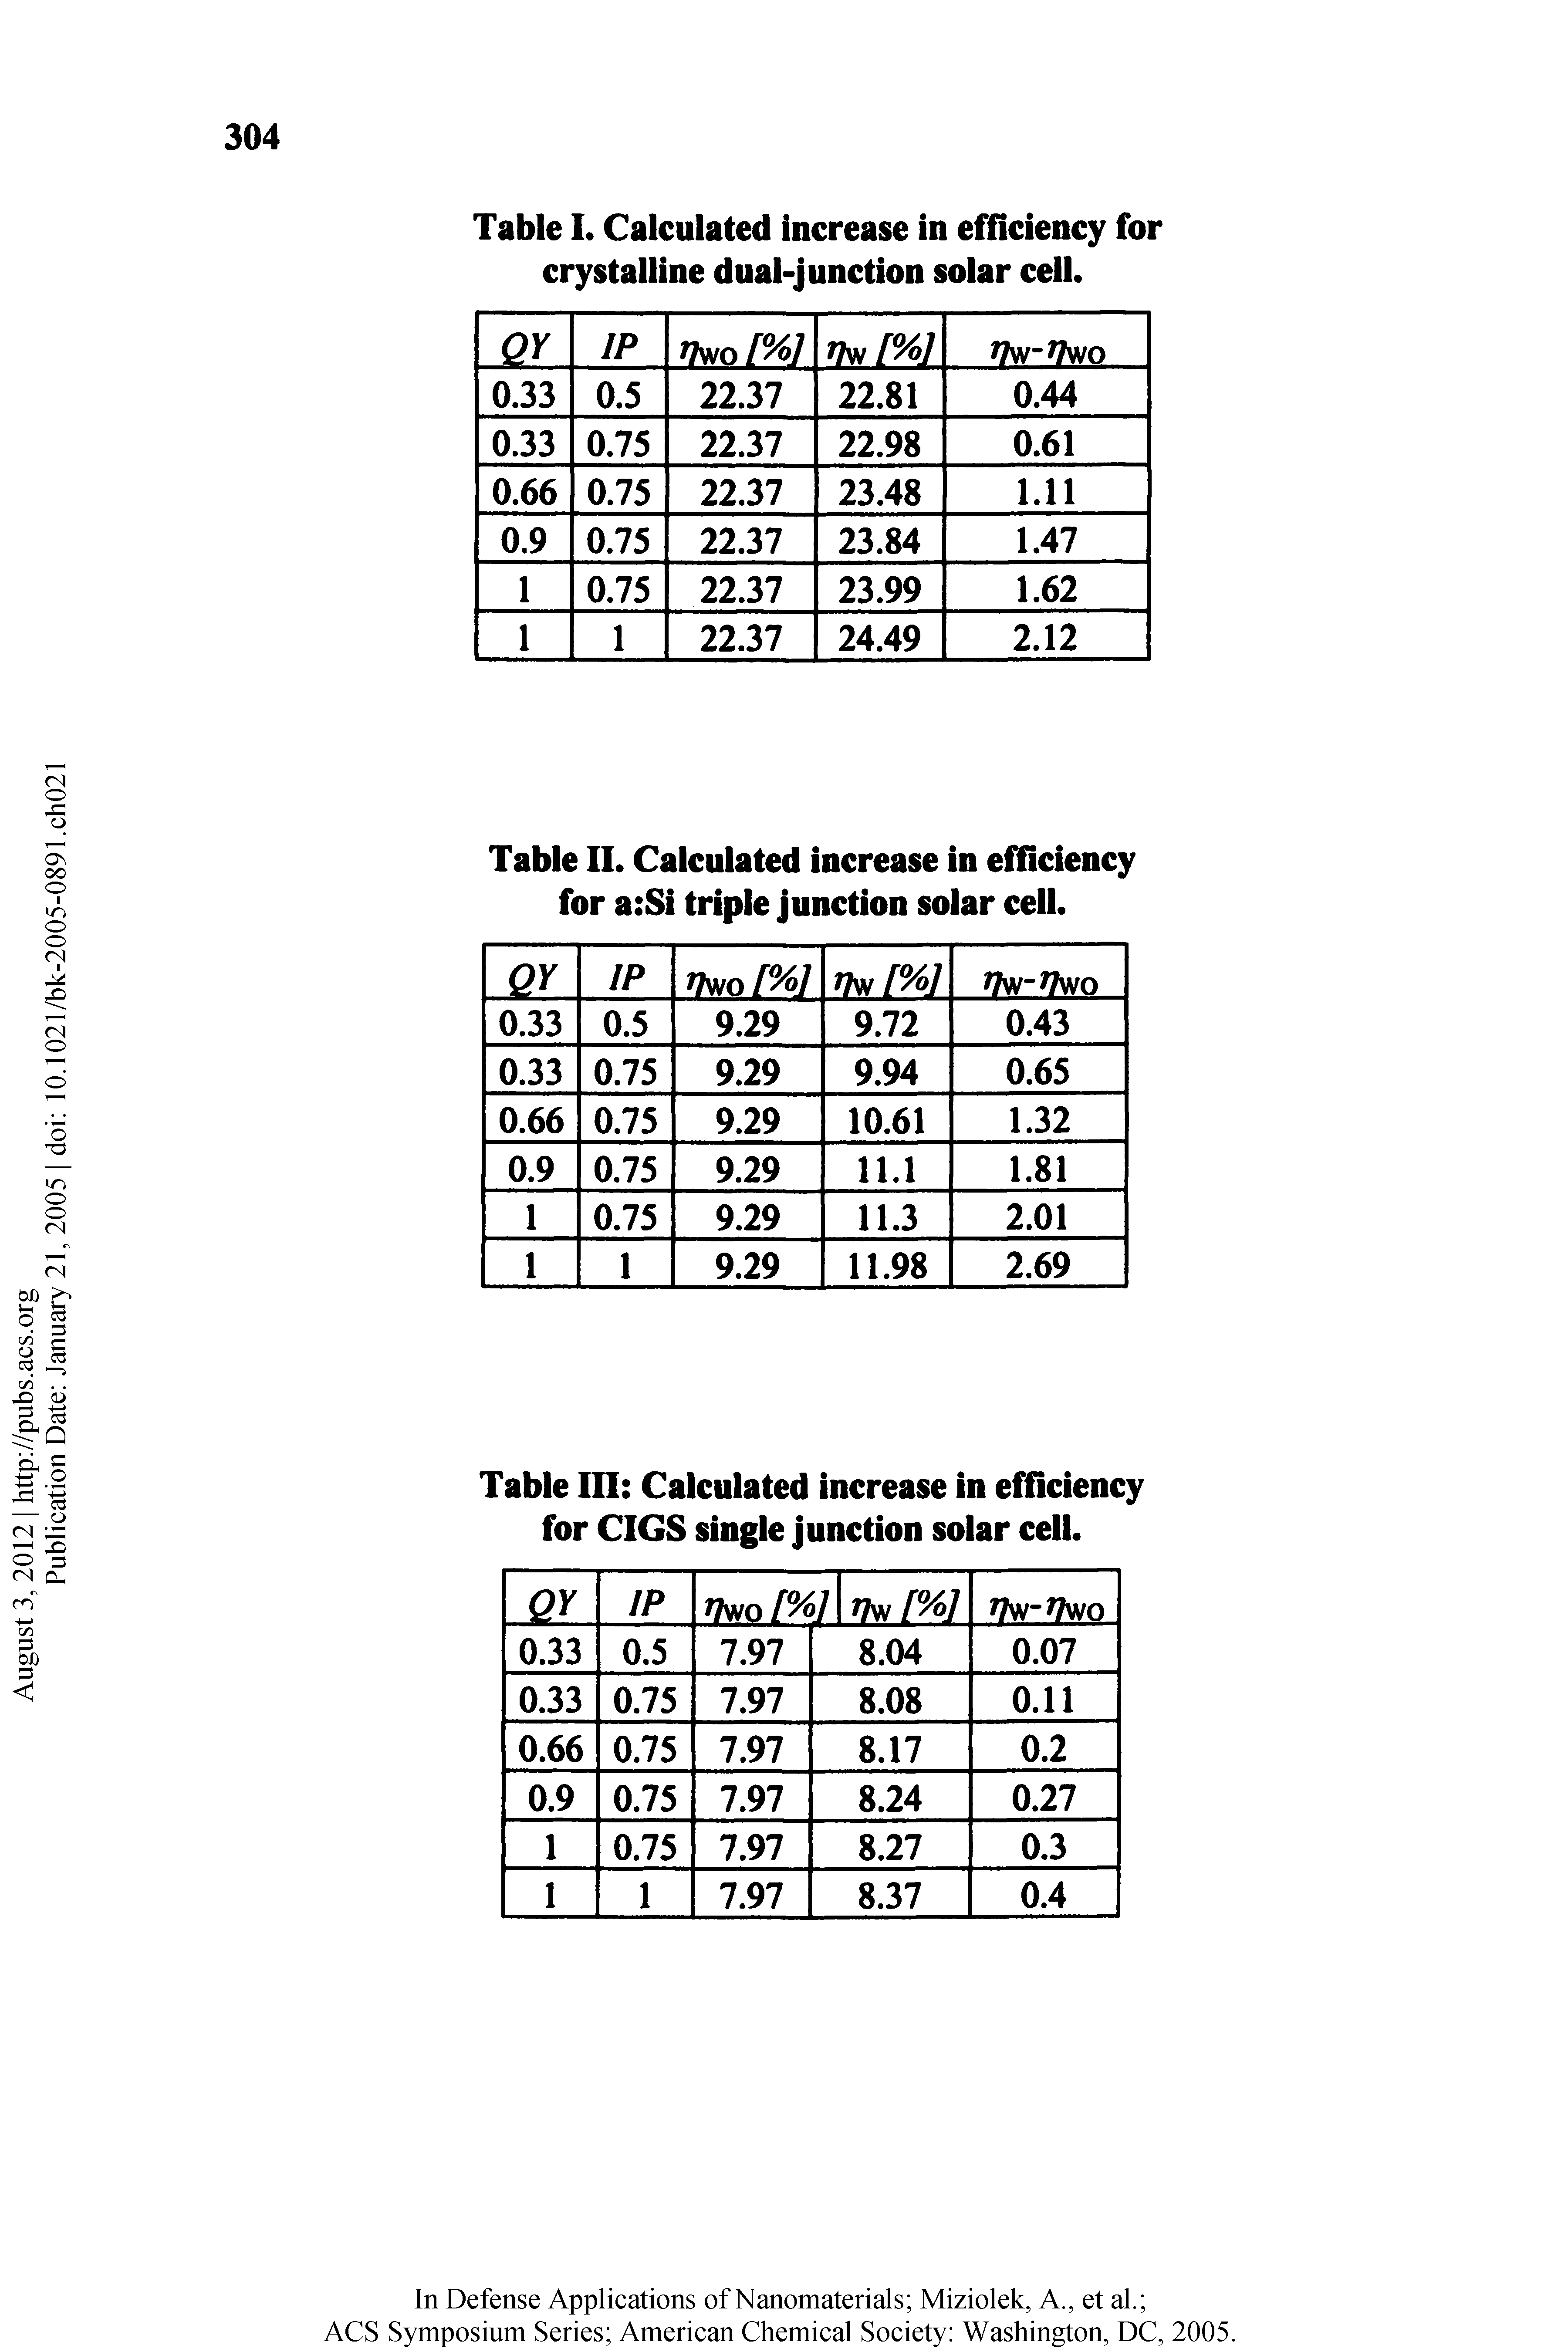 Table II. Calculated increase in efficiency for a Si triple junction solar cell.